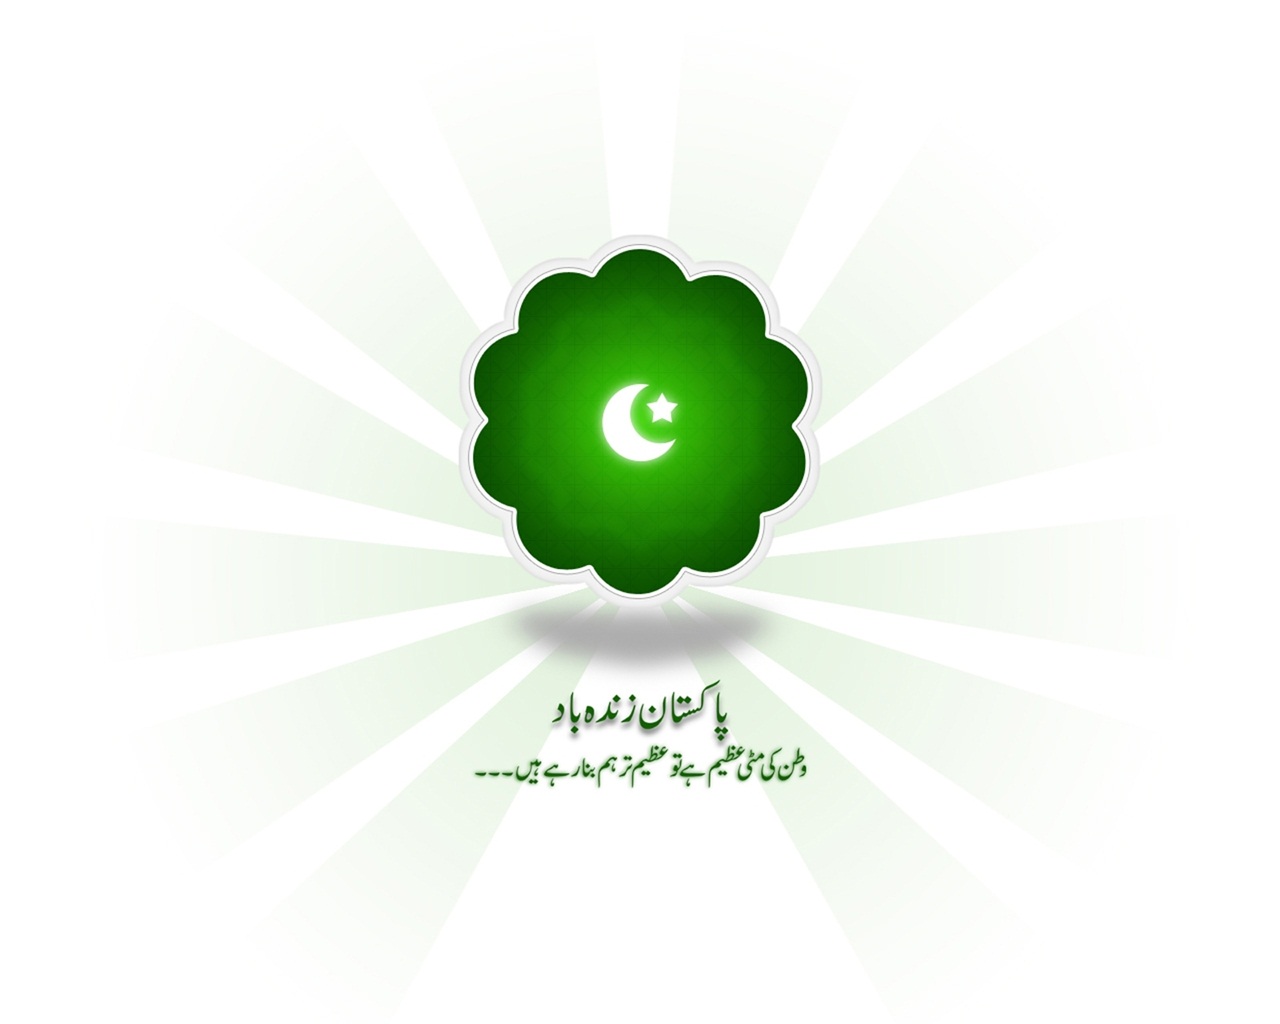 Pakistan Day Wallpaper 23rd March Youm E Greetings